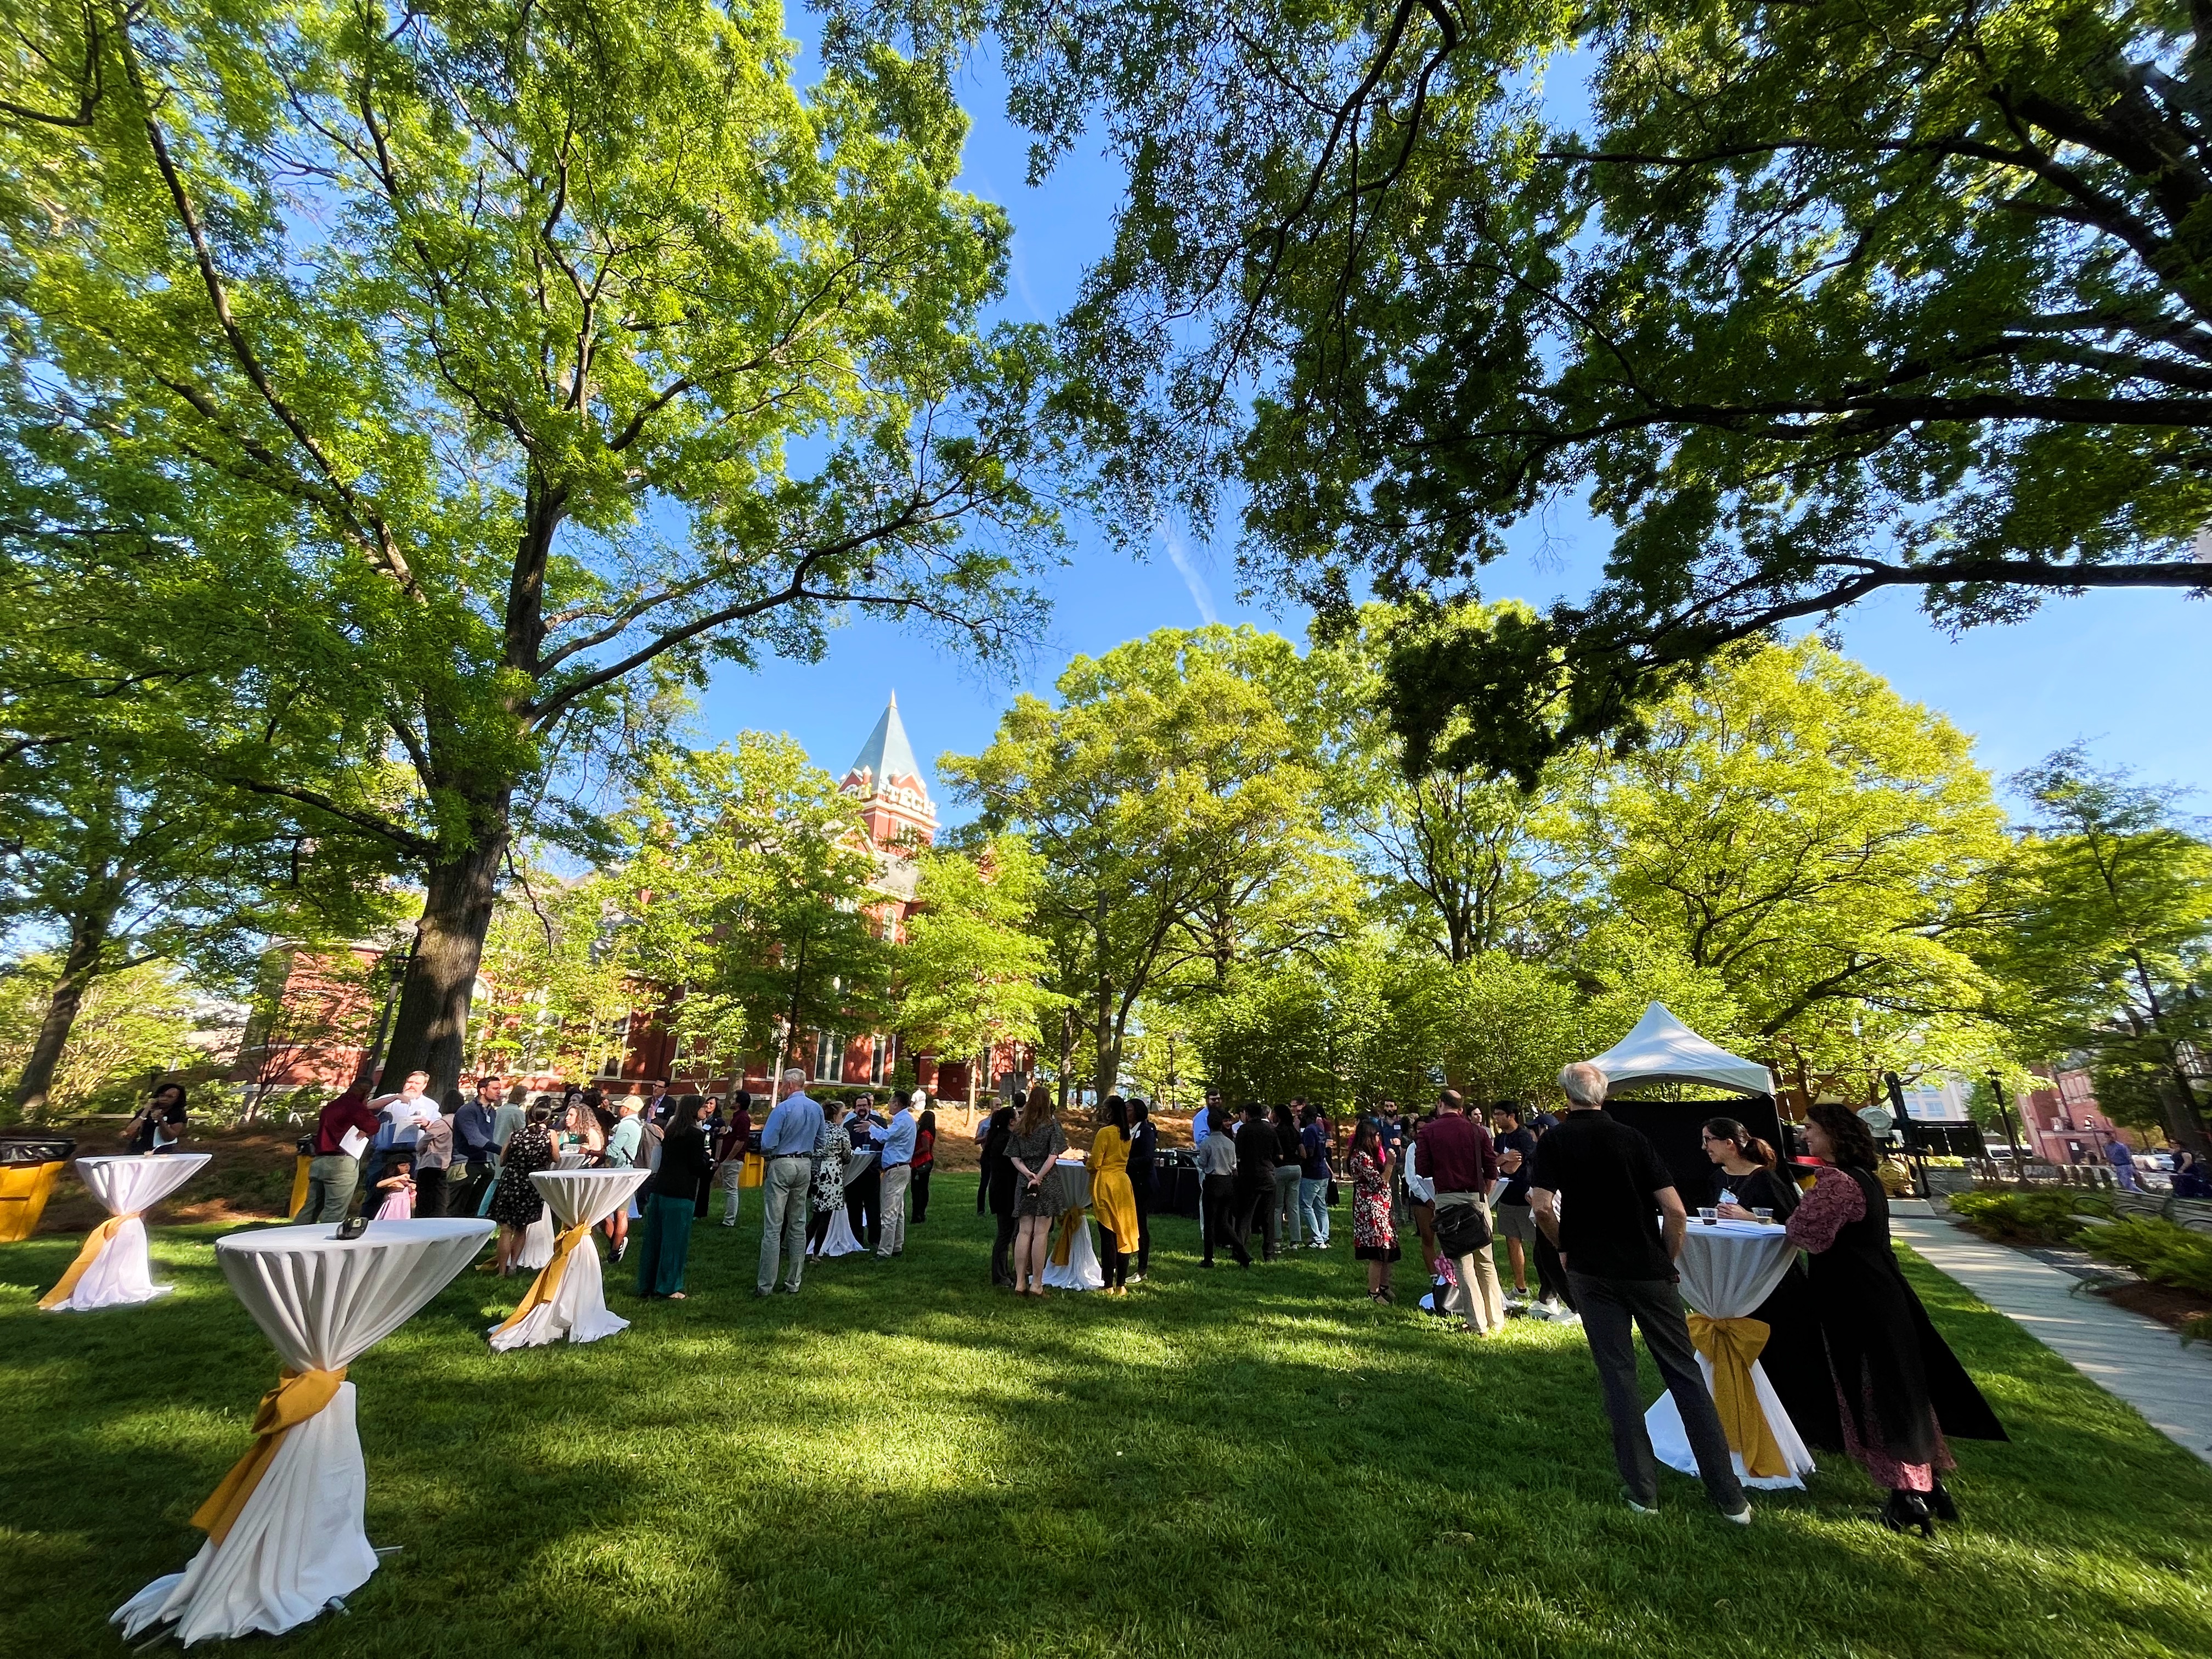 Harrison Square was the setting April 18 for the Spring Sciences Celebration of the College of Sciences. (Photo Jess Hunt-Ralston)
